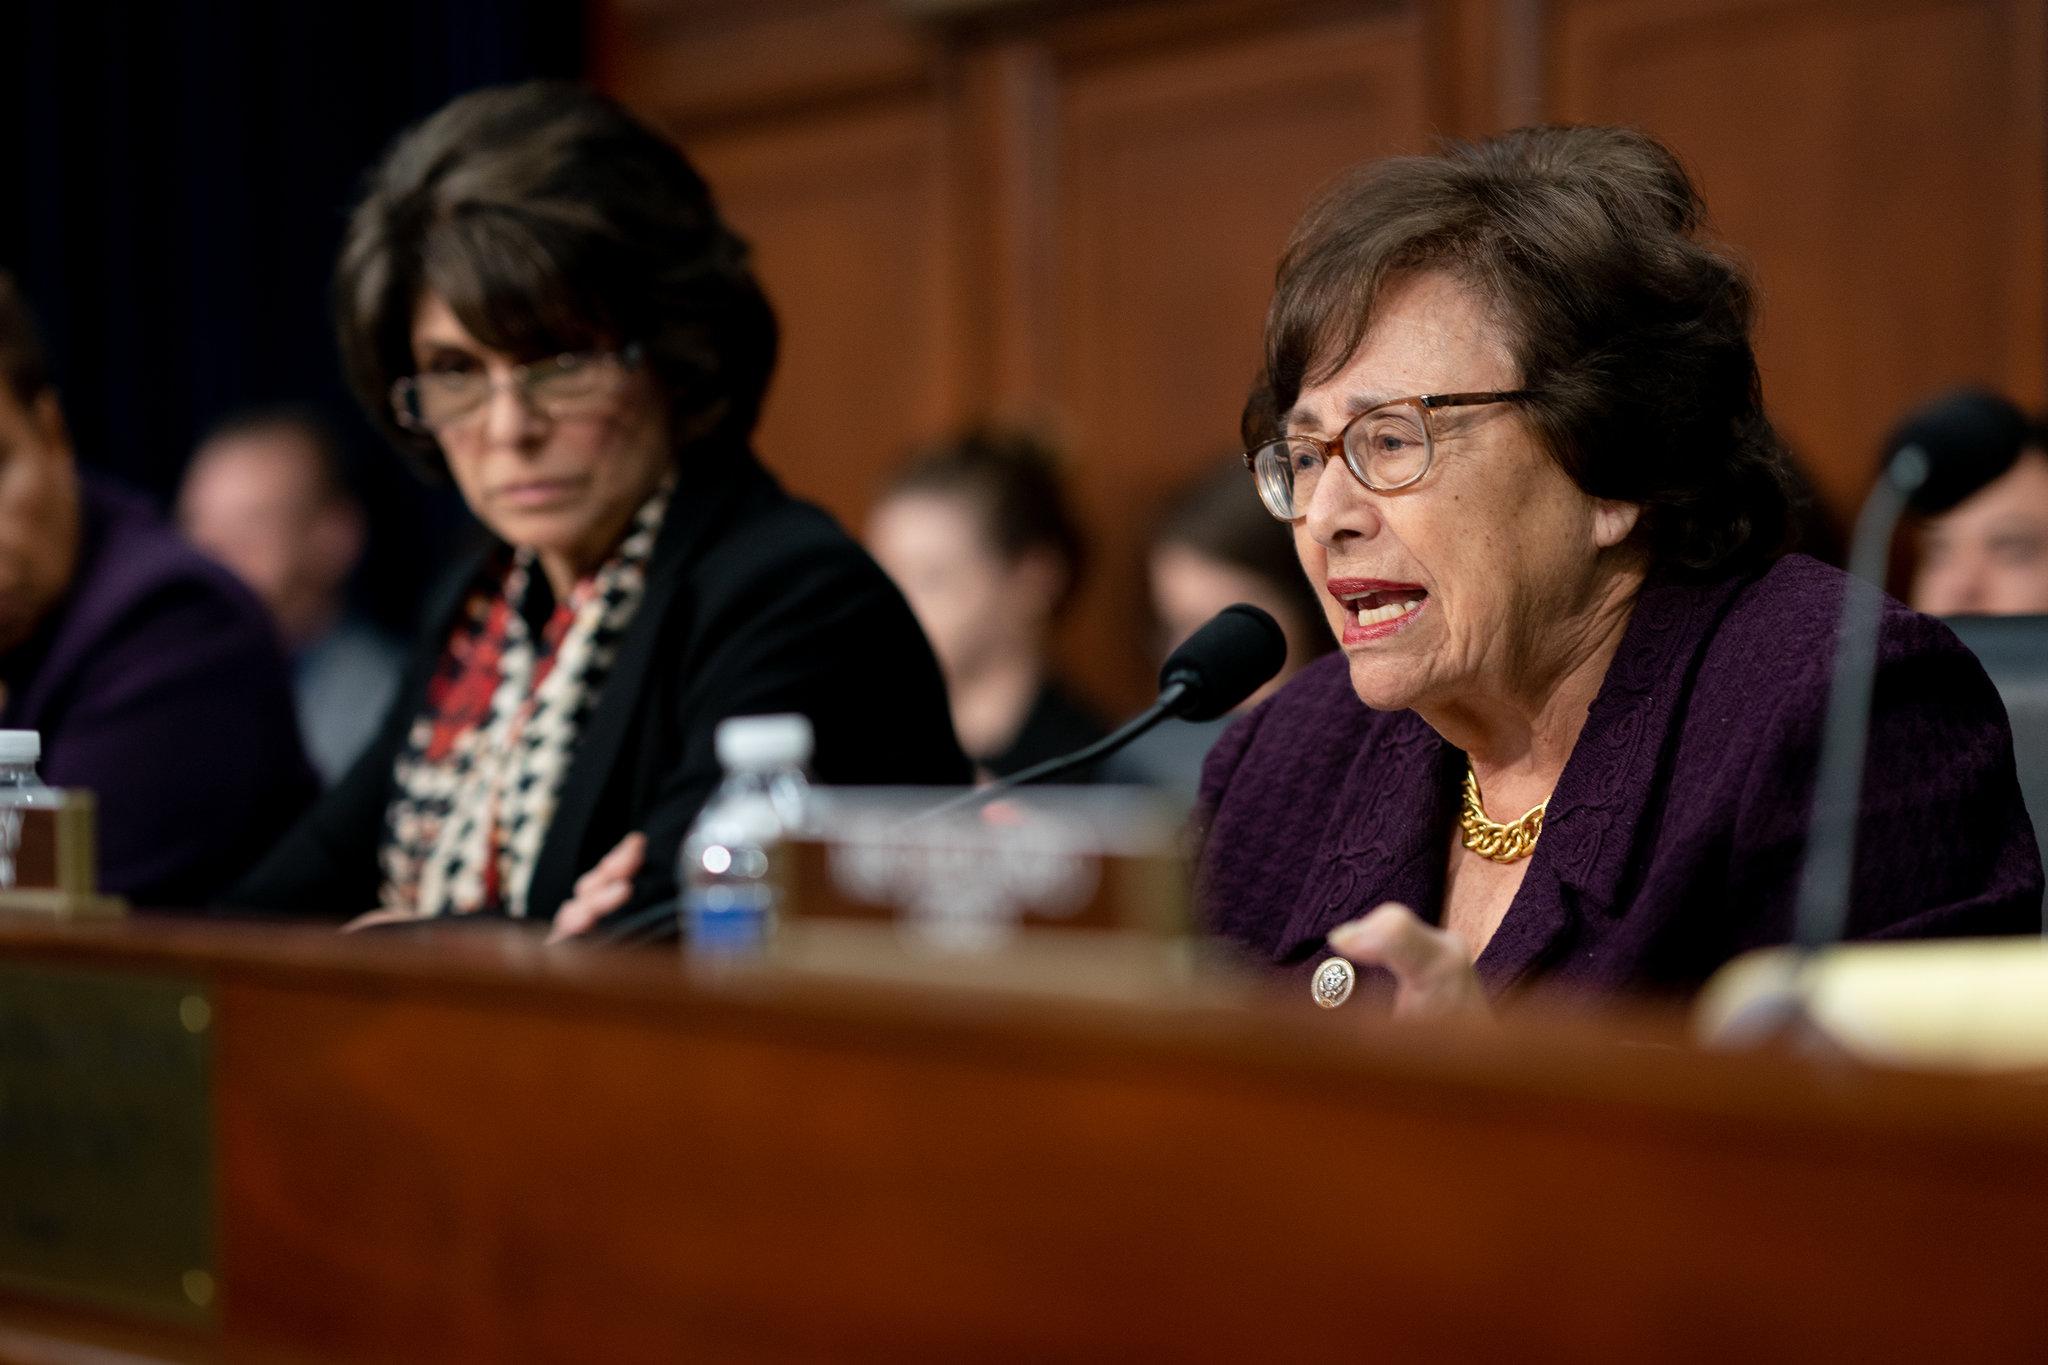 Featured image for “Statement of Appreciation for Congresswoman Nita Lowey’s Leadership”